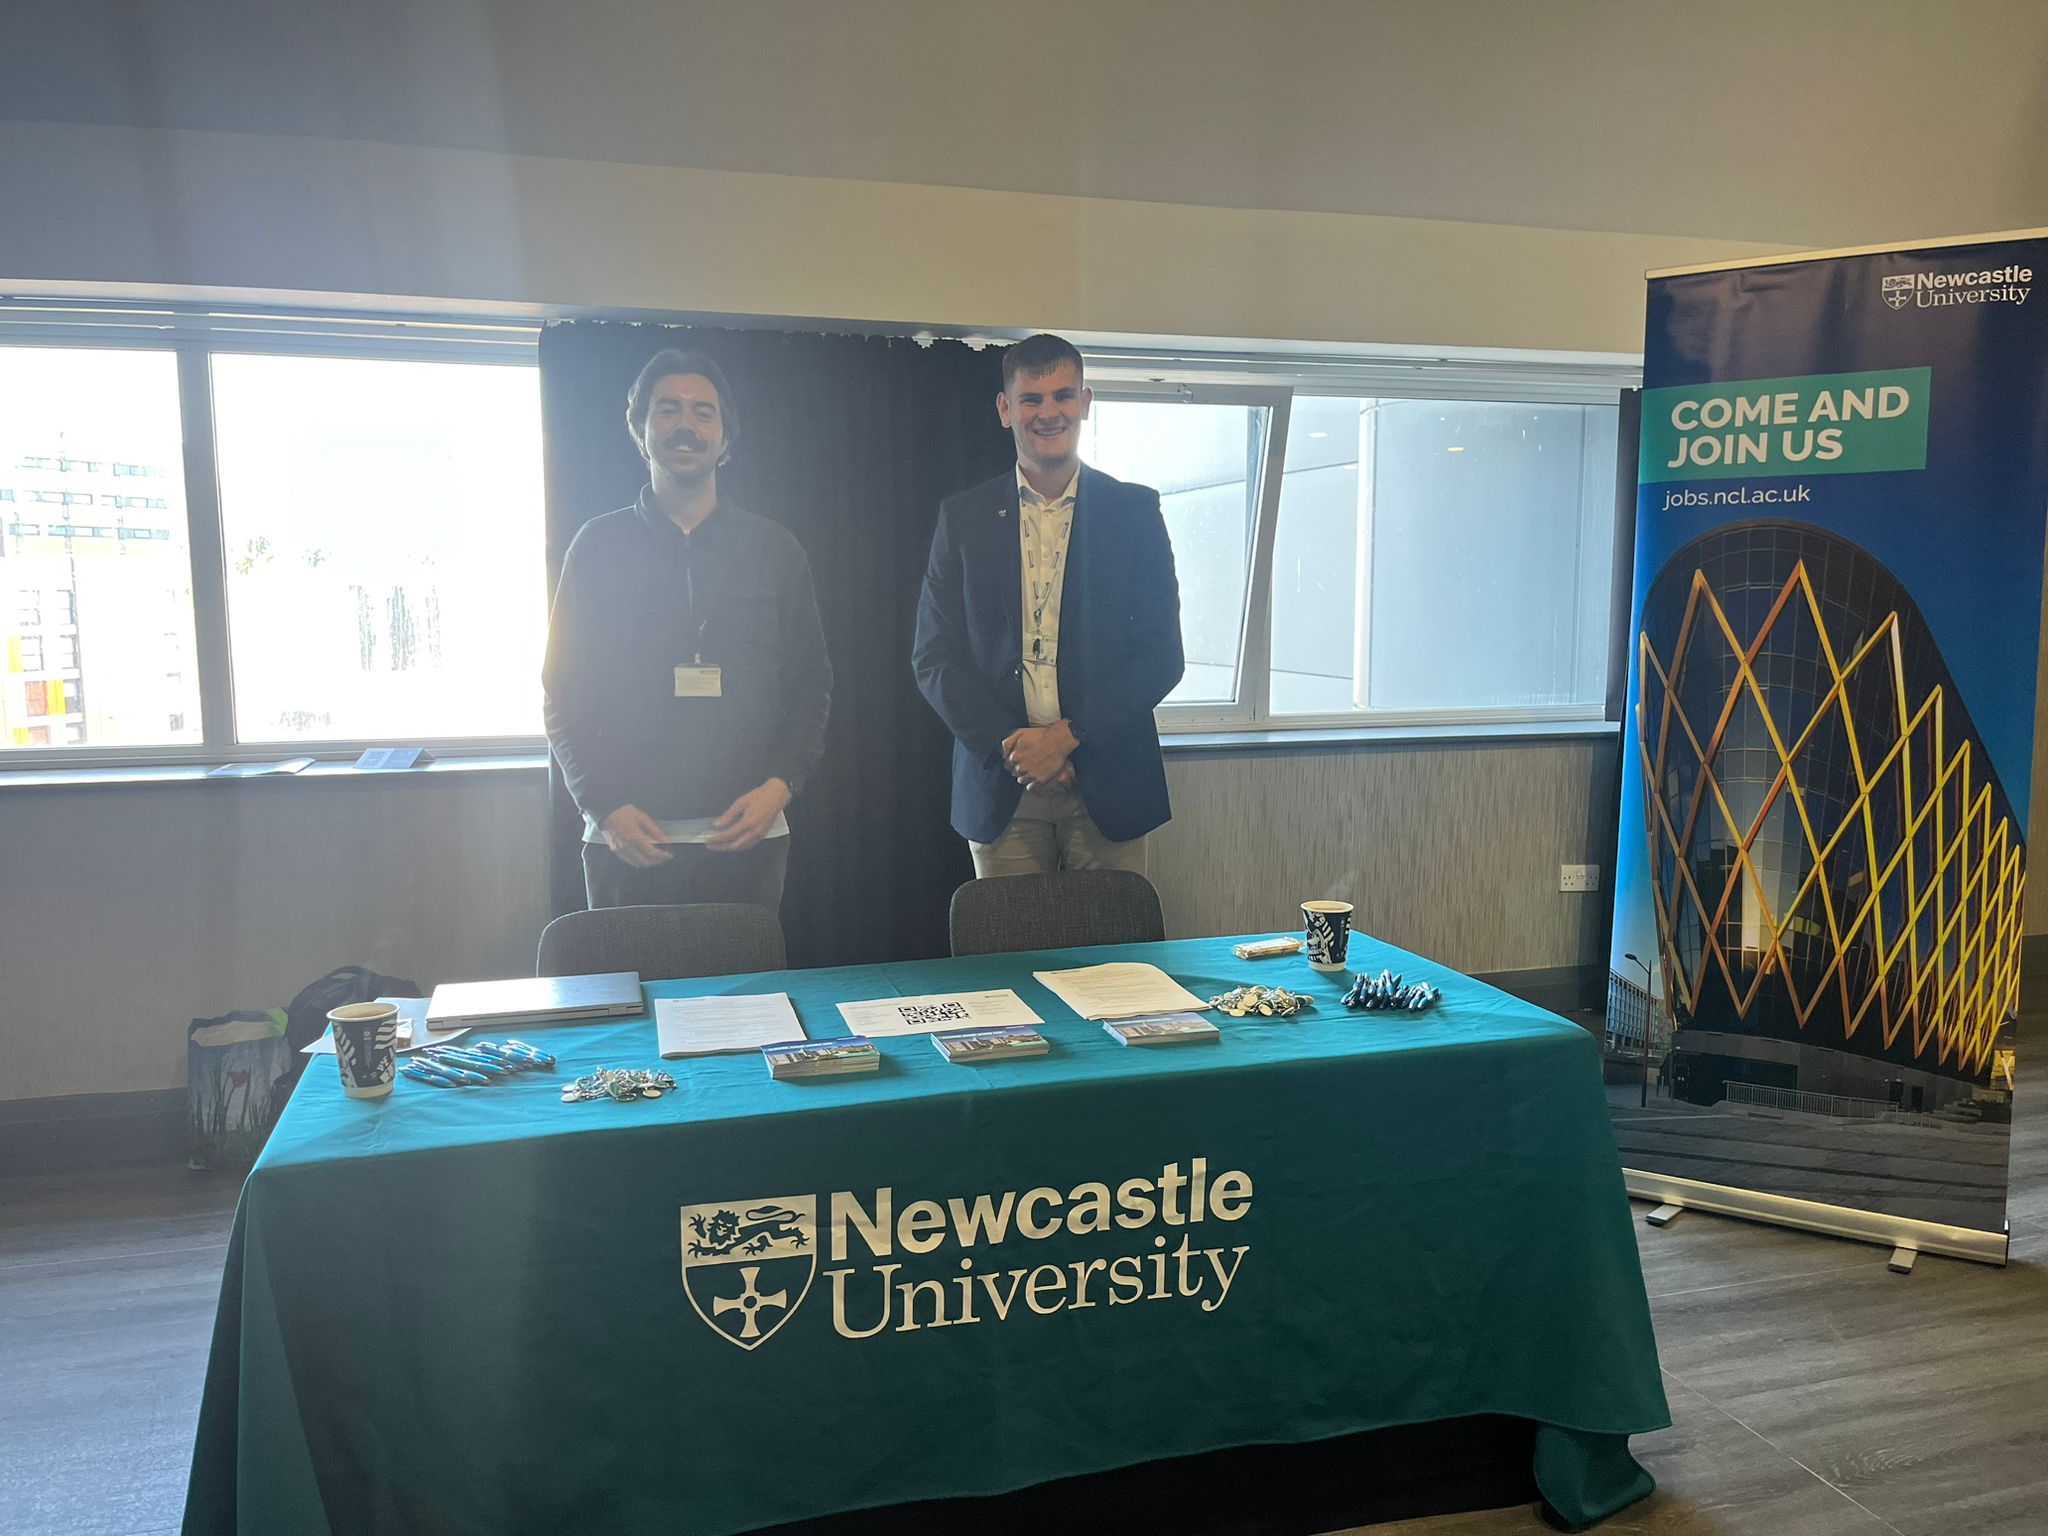 Newcastle University at our event in Newcastle